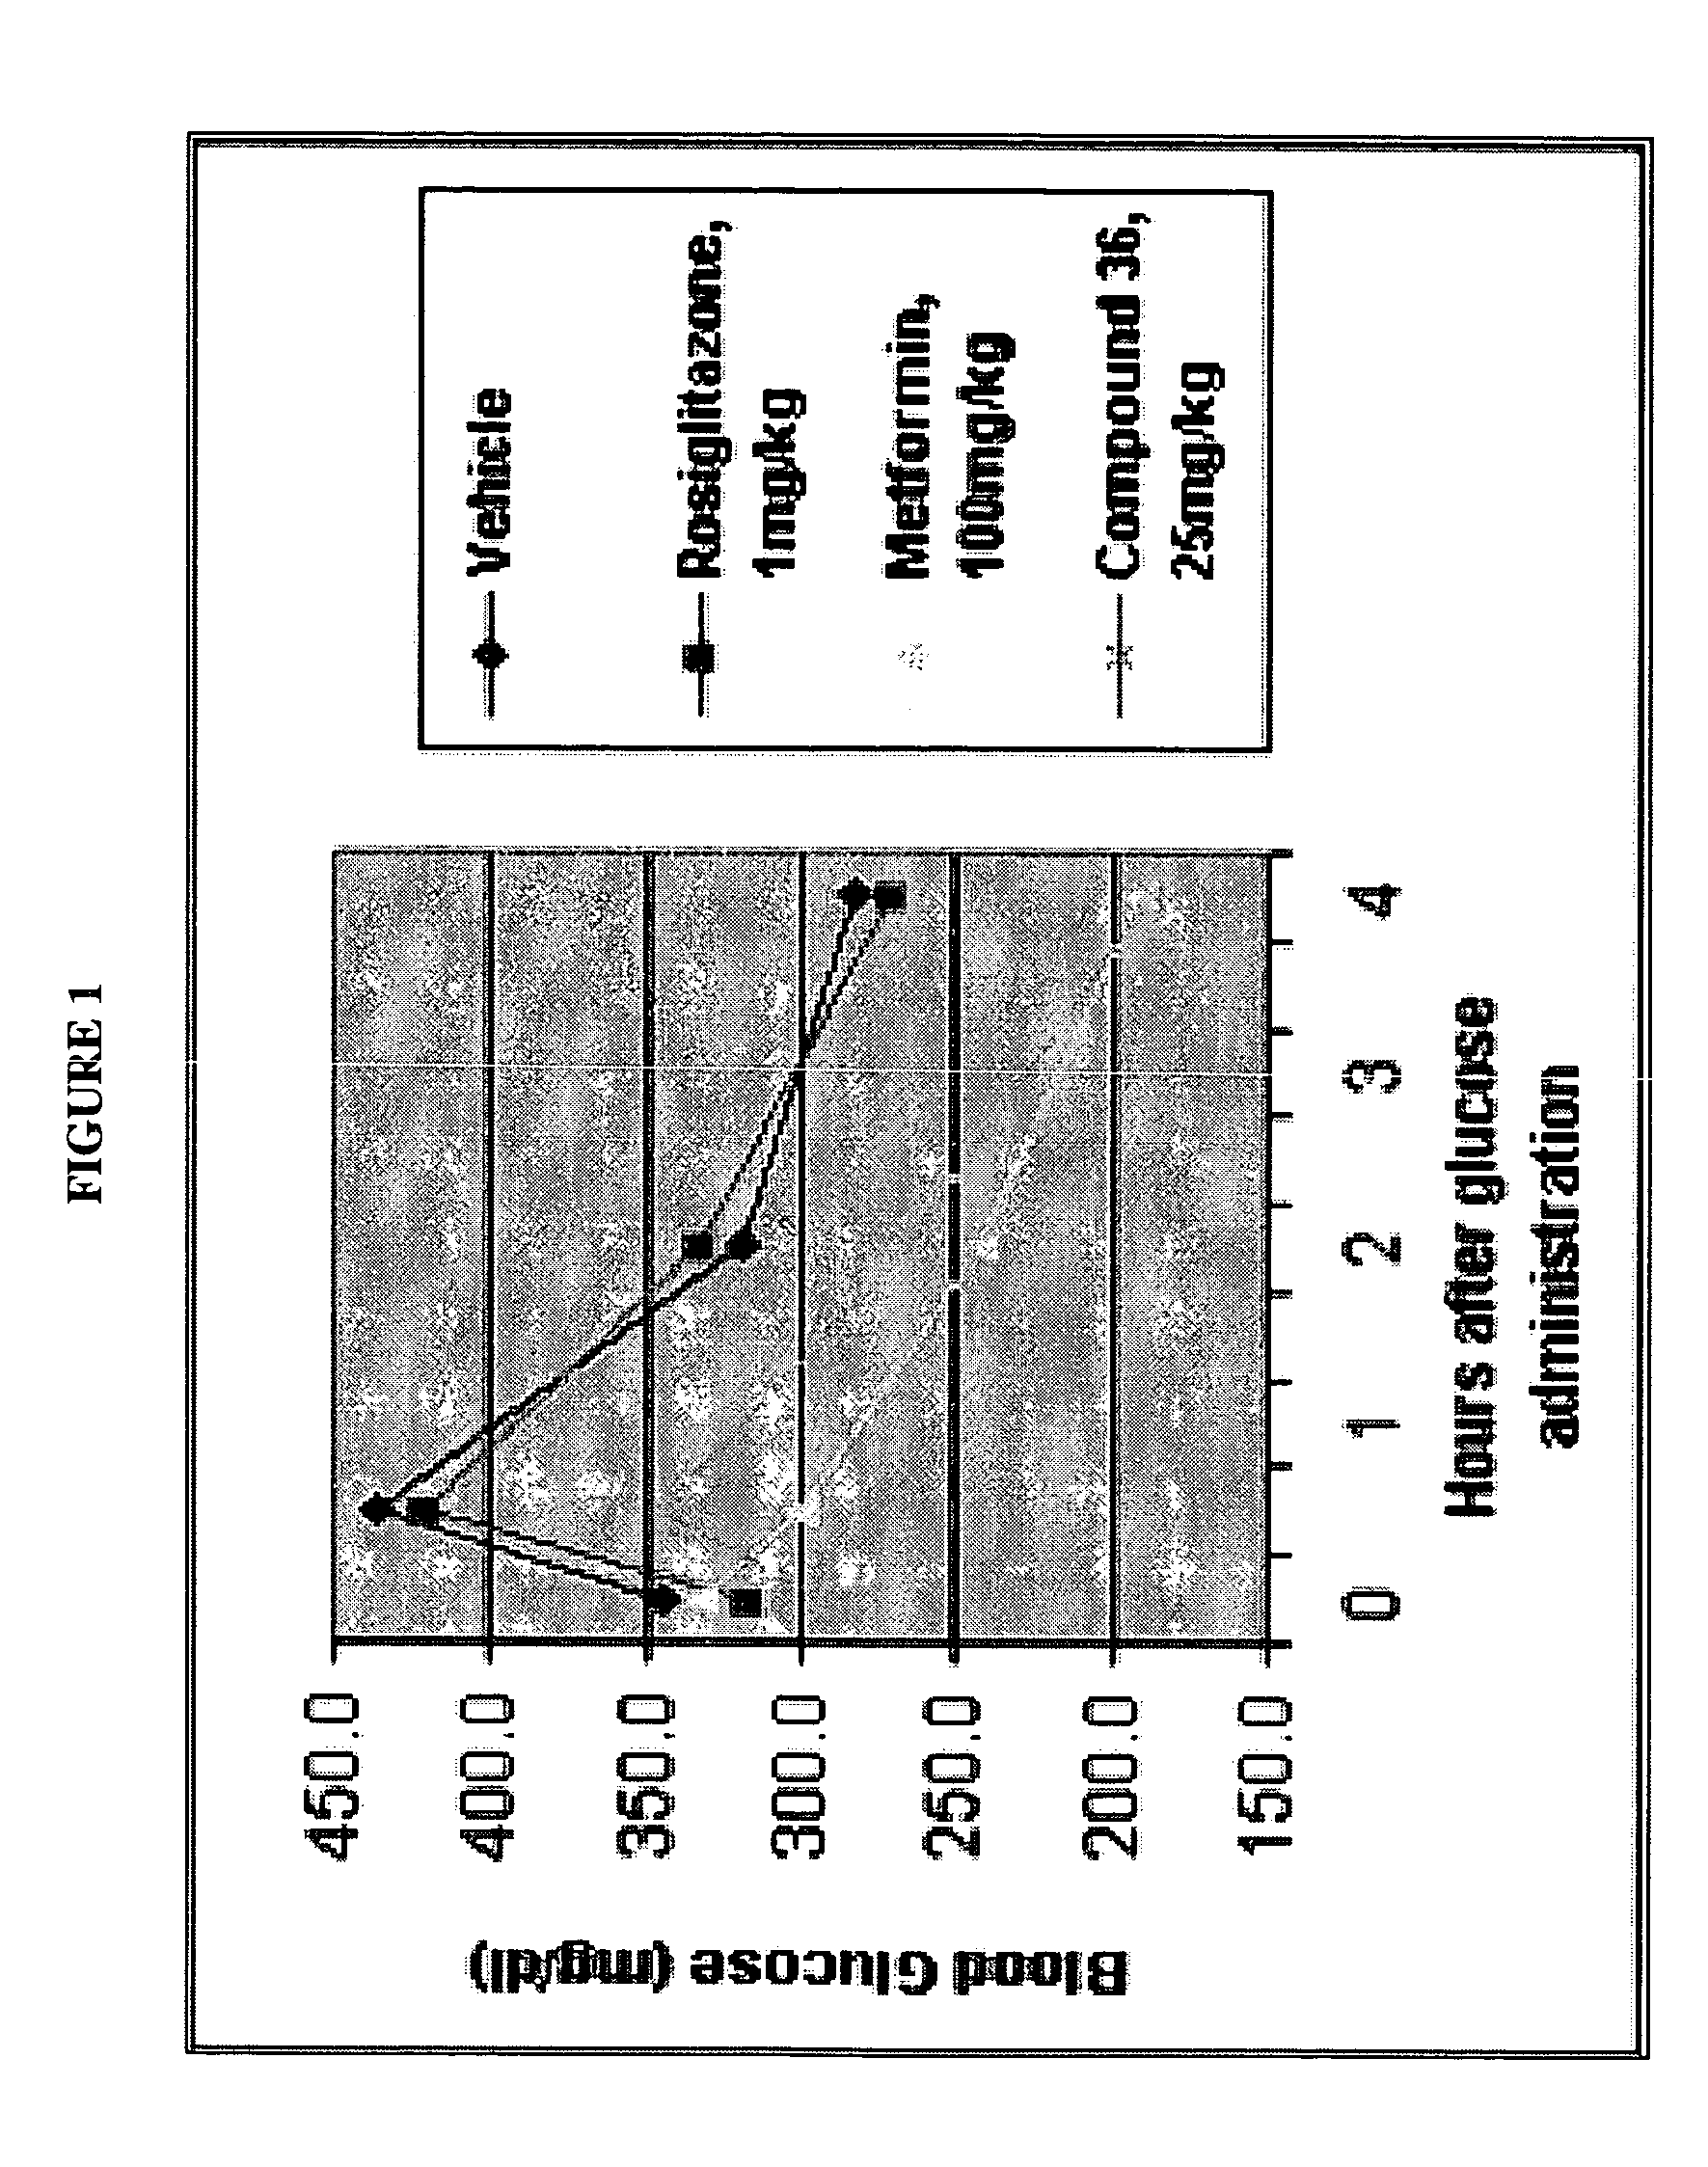 Dihydropyridine compounds for treating or preventing metabolic disorders